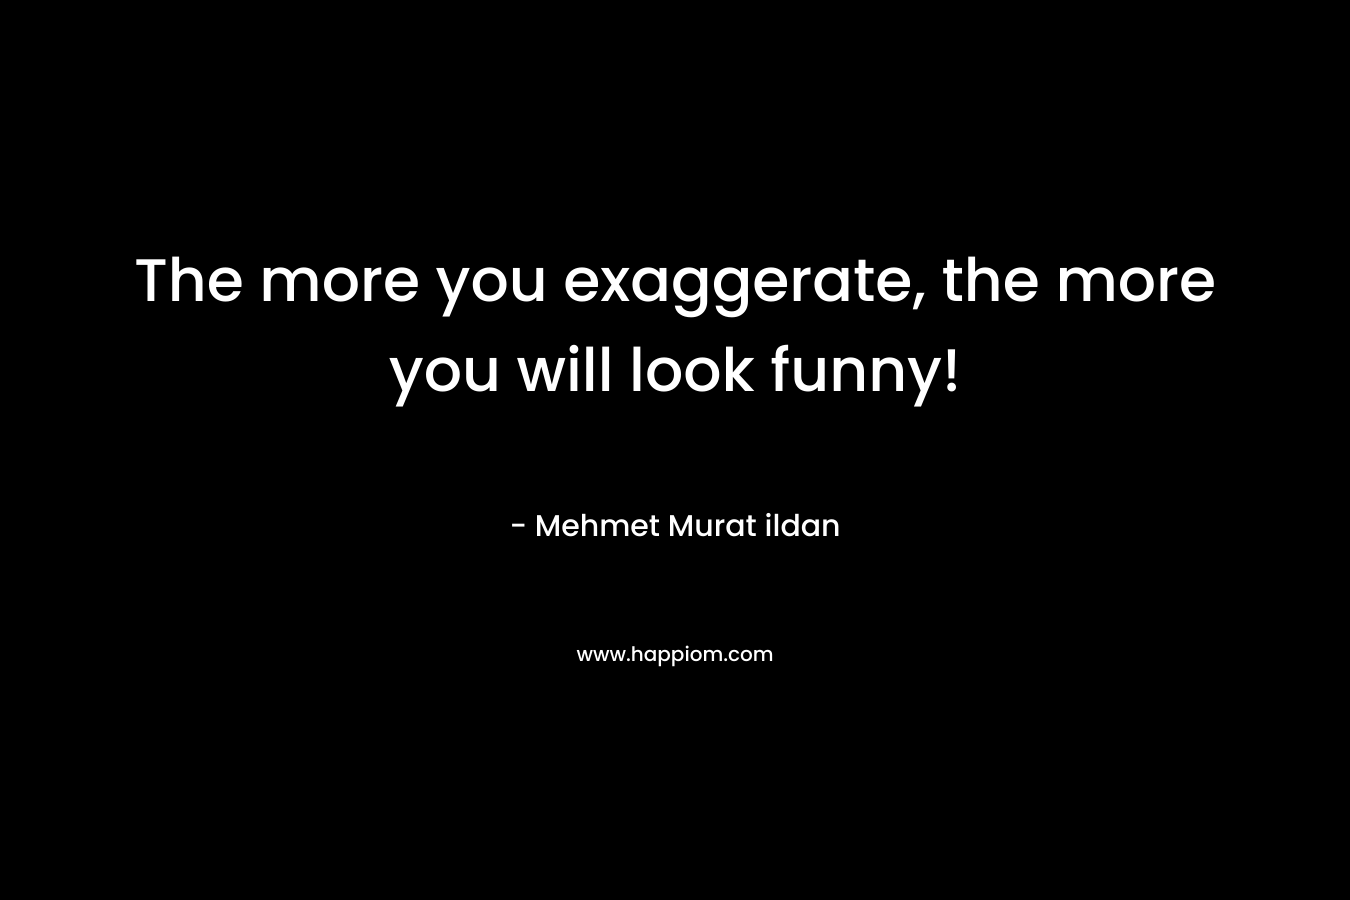 The more you exaggerate, the more you will look funny!